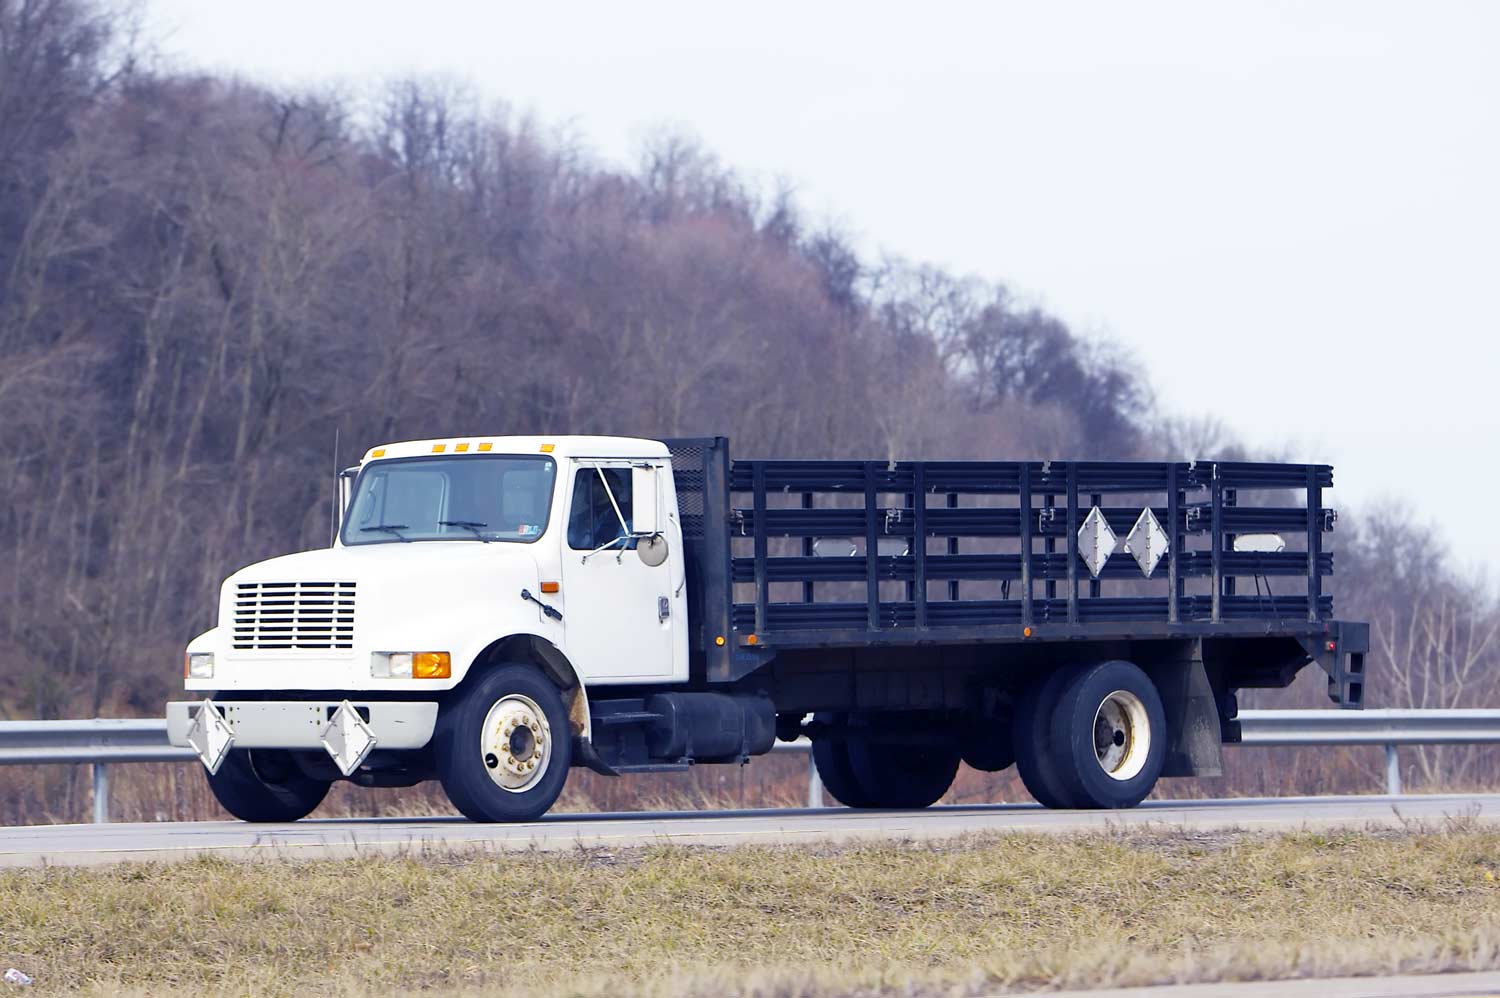 We can help you get flatbed truck insurance quotes.